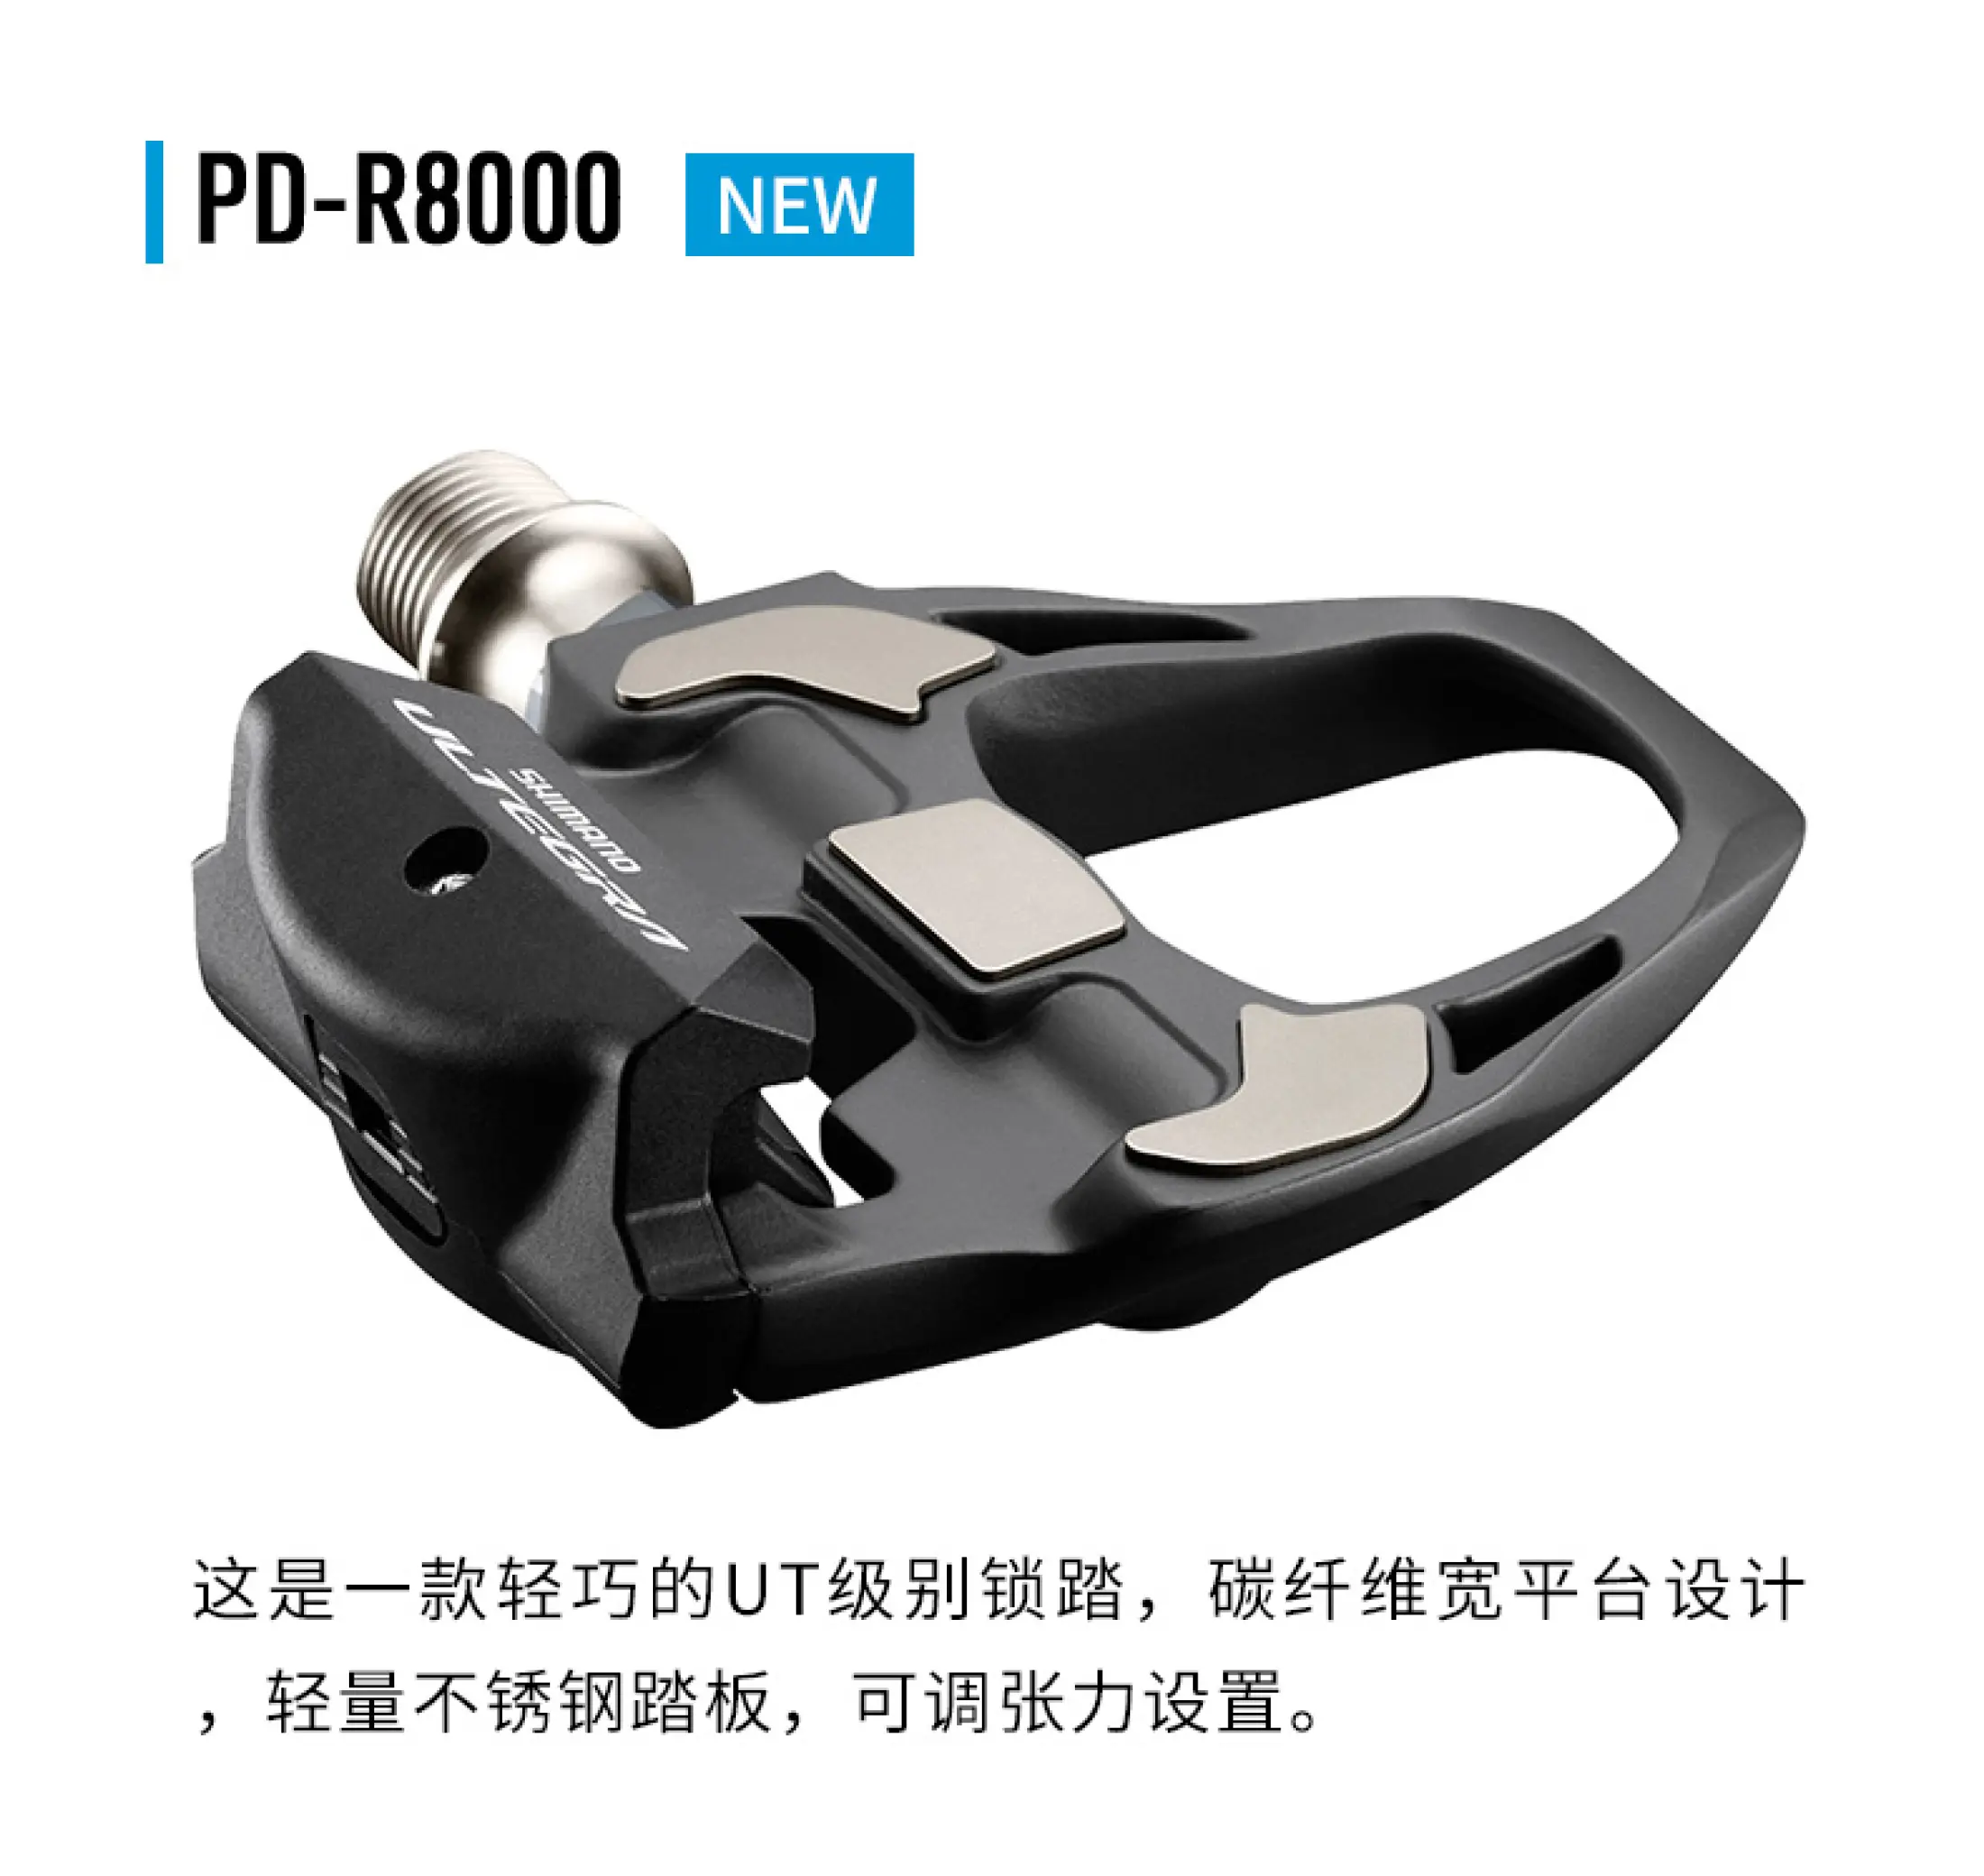 shimano pedals rs500